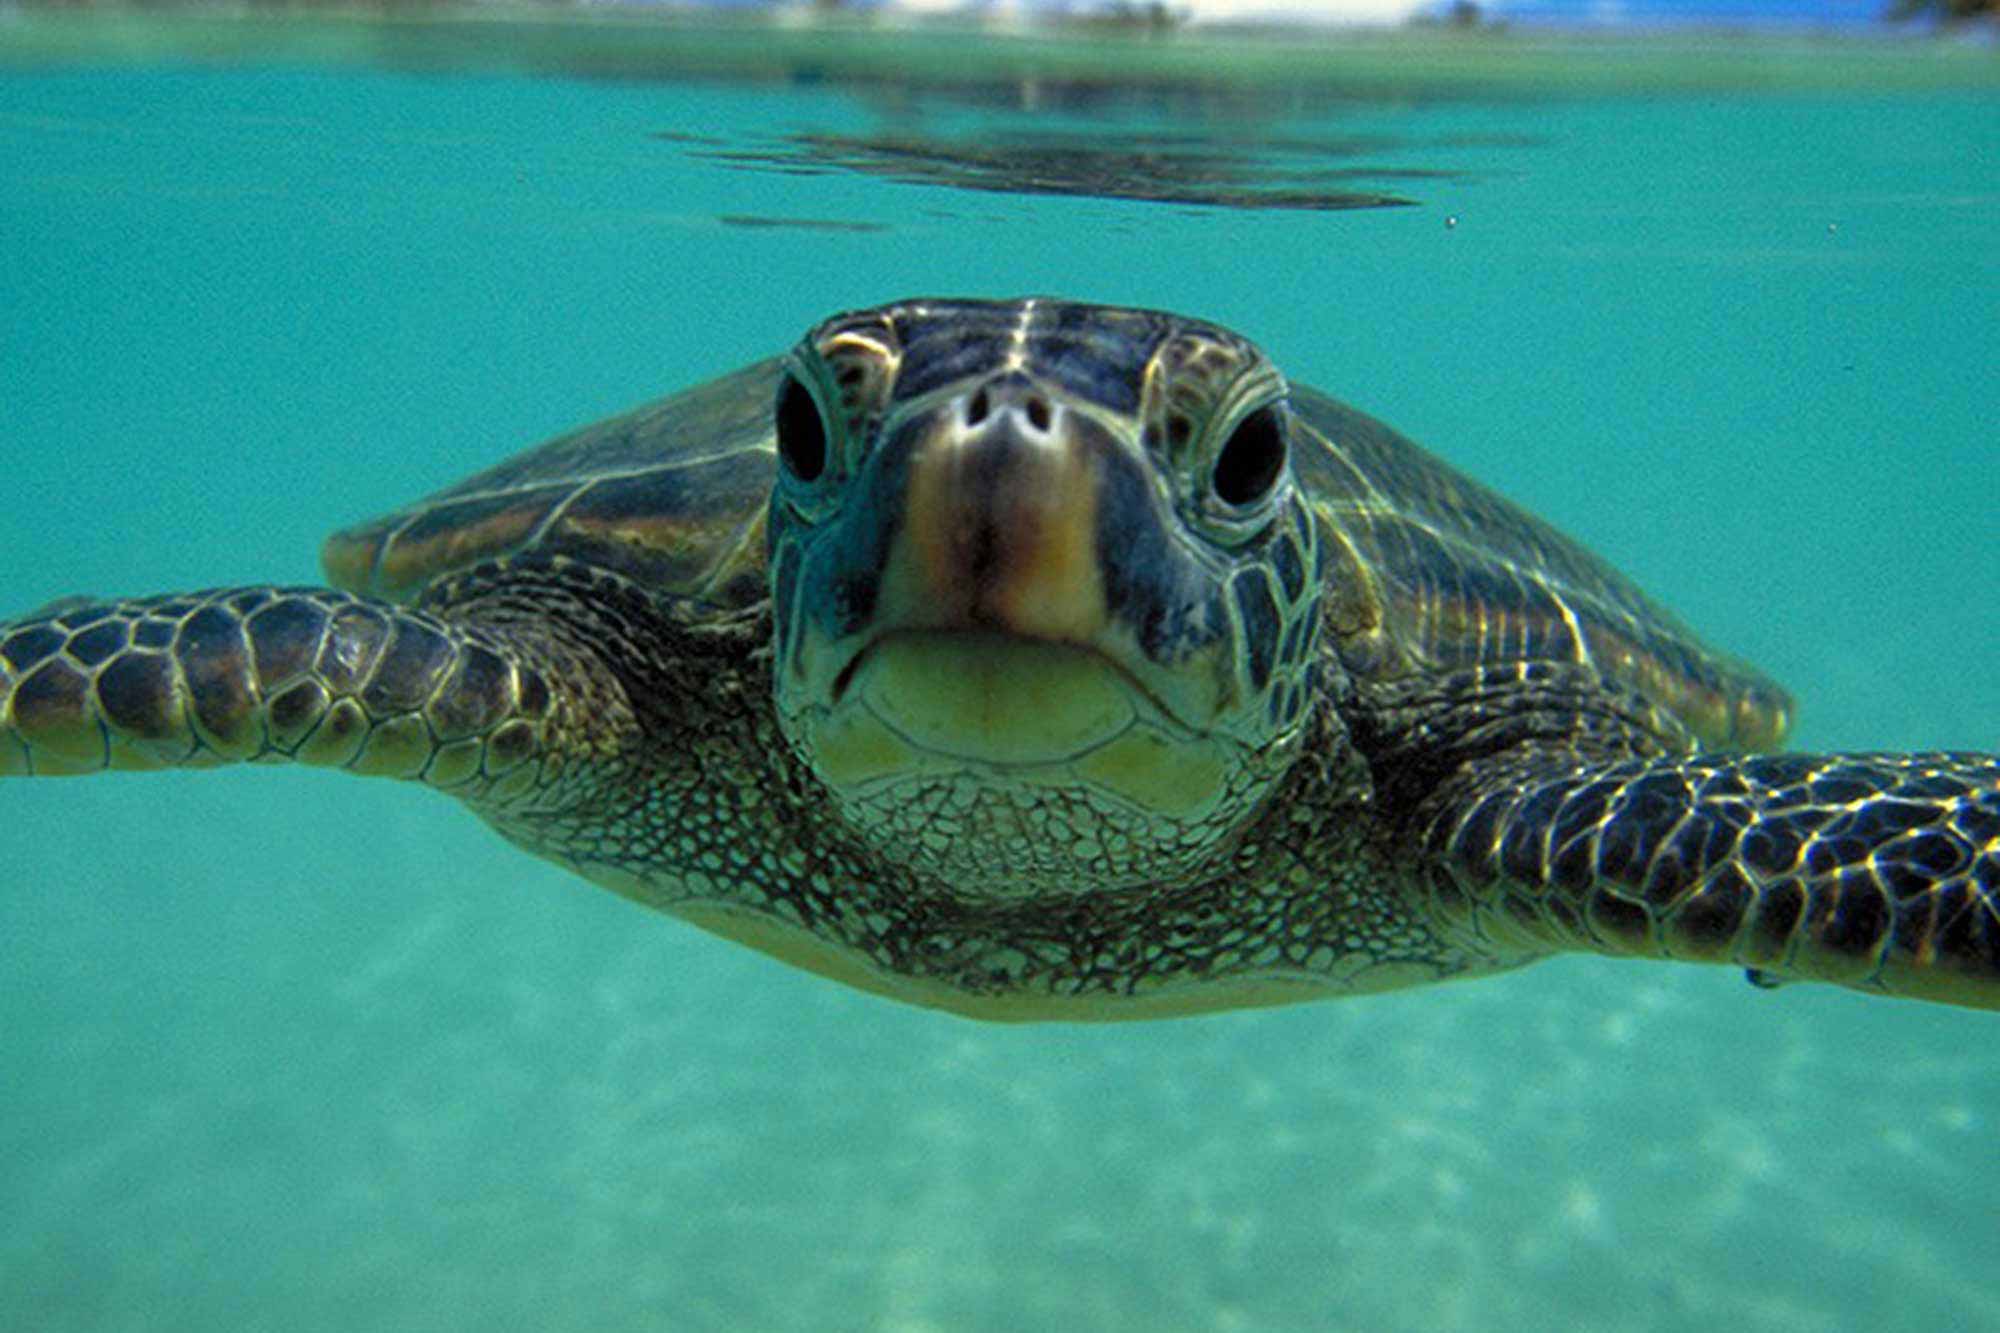 The Mauna Lani Bay Hotel has raised and released hundreds of green turtles, so the Kohala Coast boasts a large population of them. Get out in the water to meet them or see several that swim in the hotel pond. Photo courtesy Mauna Lani Bay Hotel.